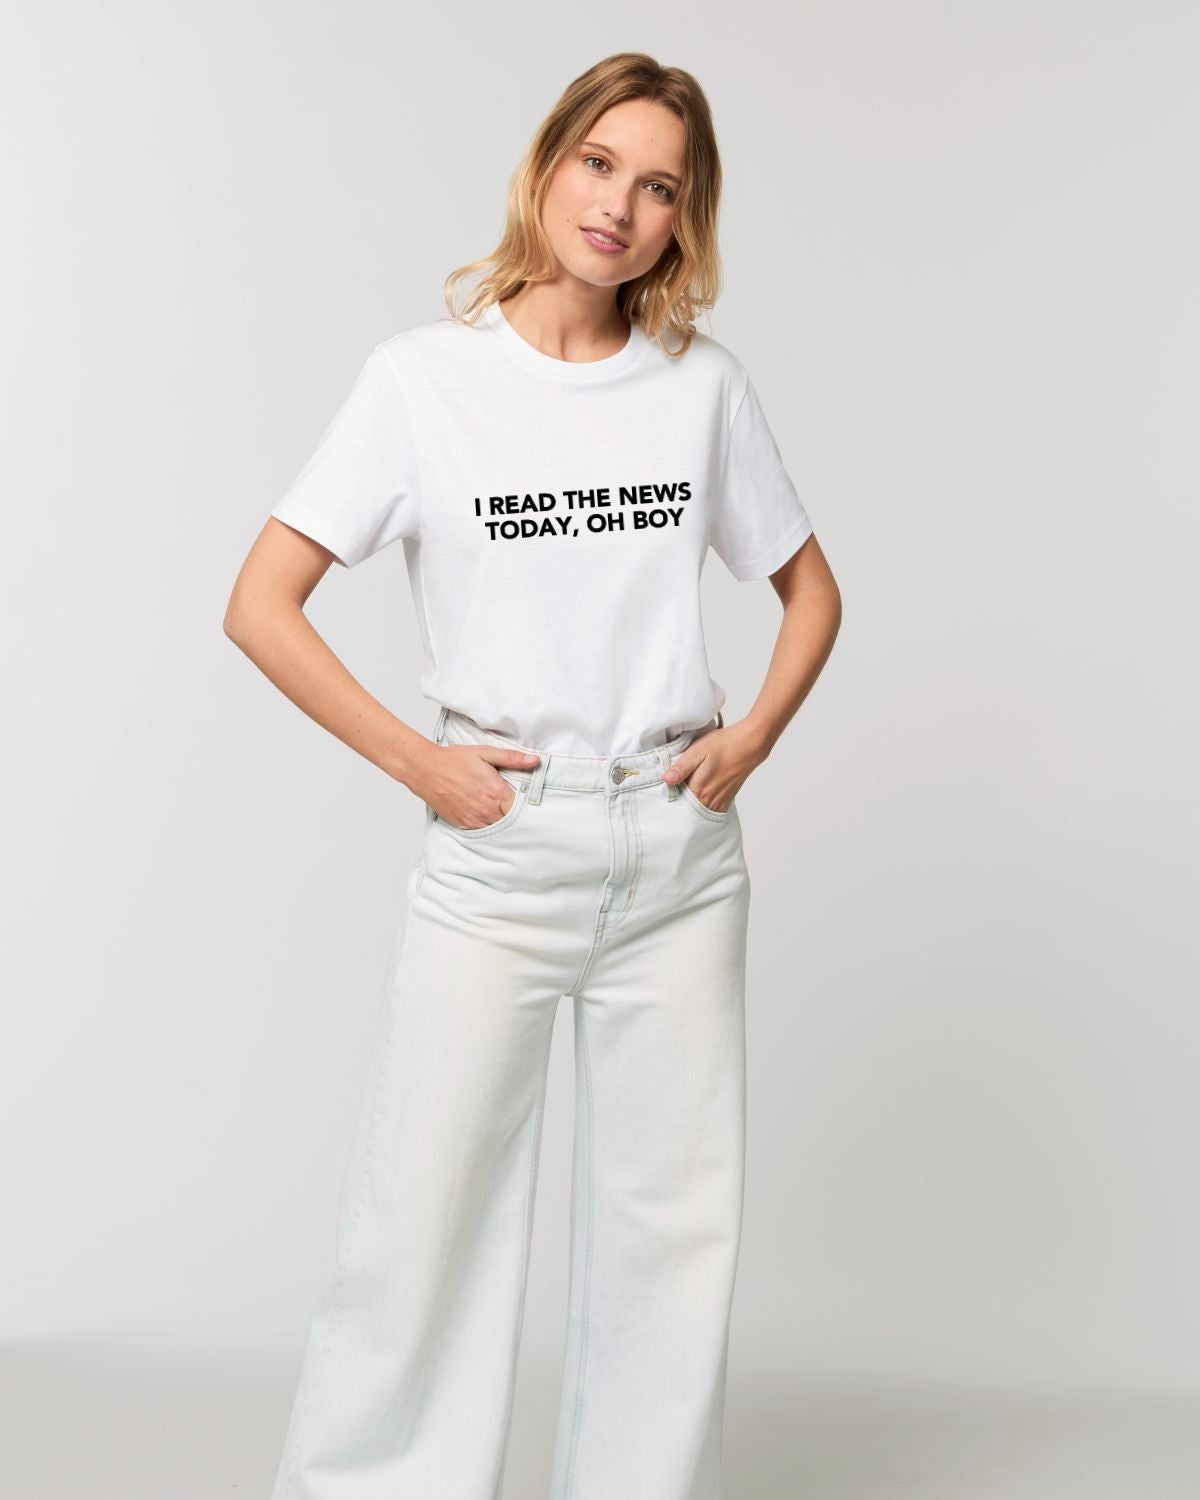 SAMPLE SALE 'I READ THE NEWS TODAY, OH BOY' EMBROIDERED UNISEX MEDIUM FIT ORGANIC COTTON T-SHIRT (SIZE XXL)